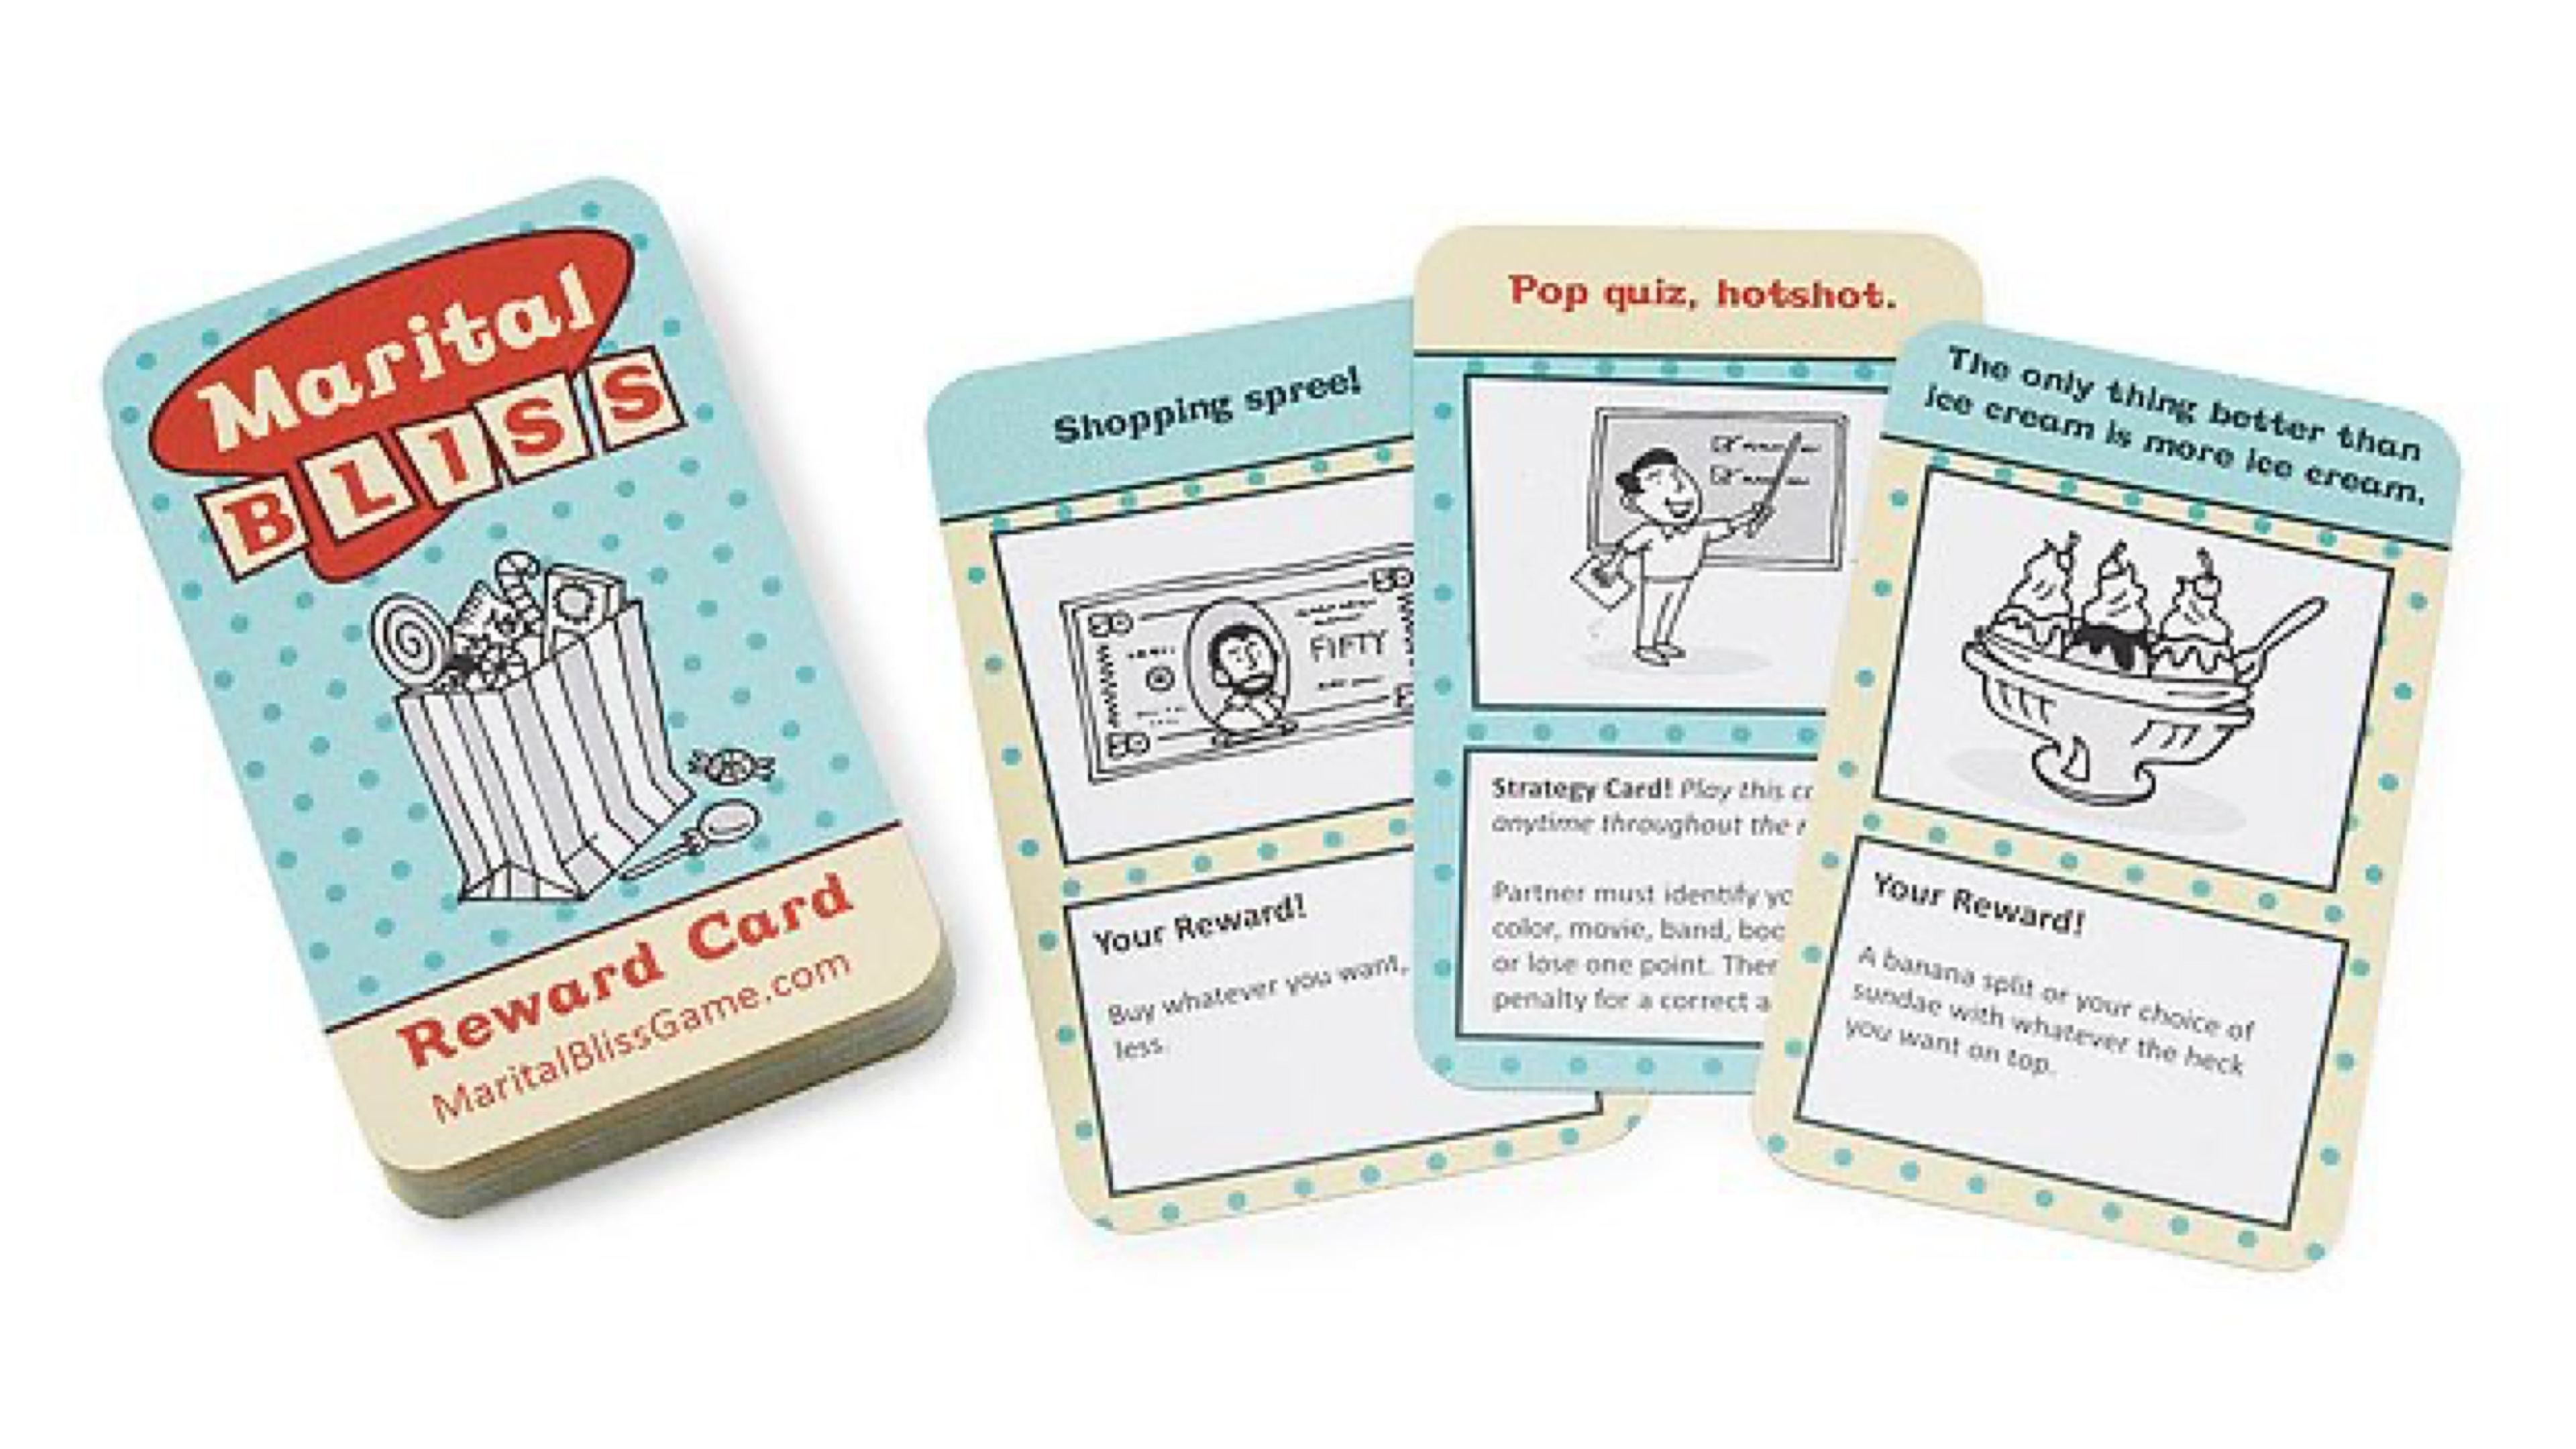 card game for married couples to show appreciation toward each other